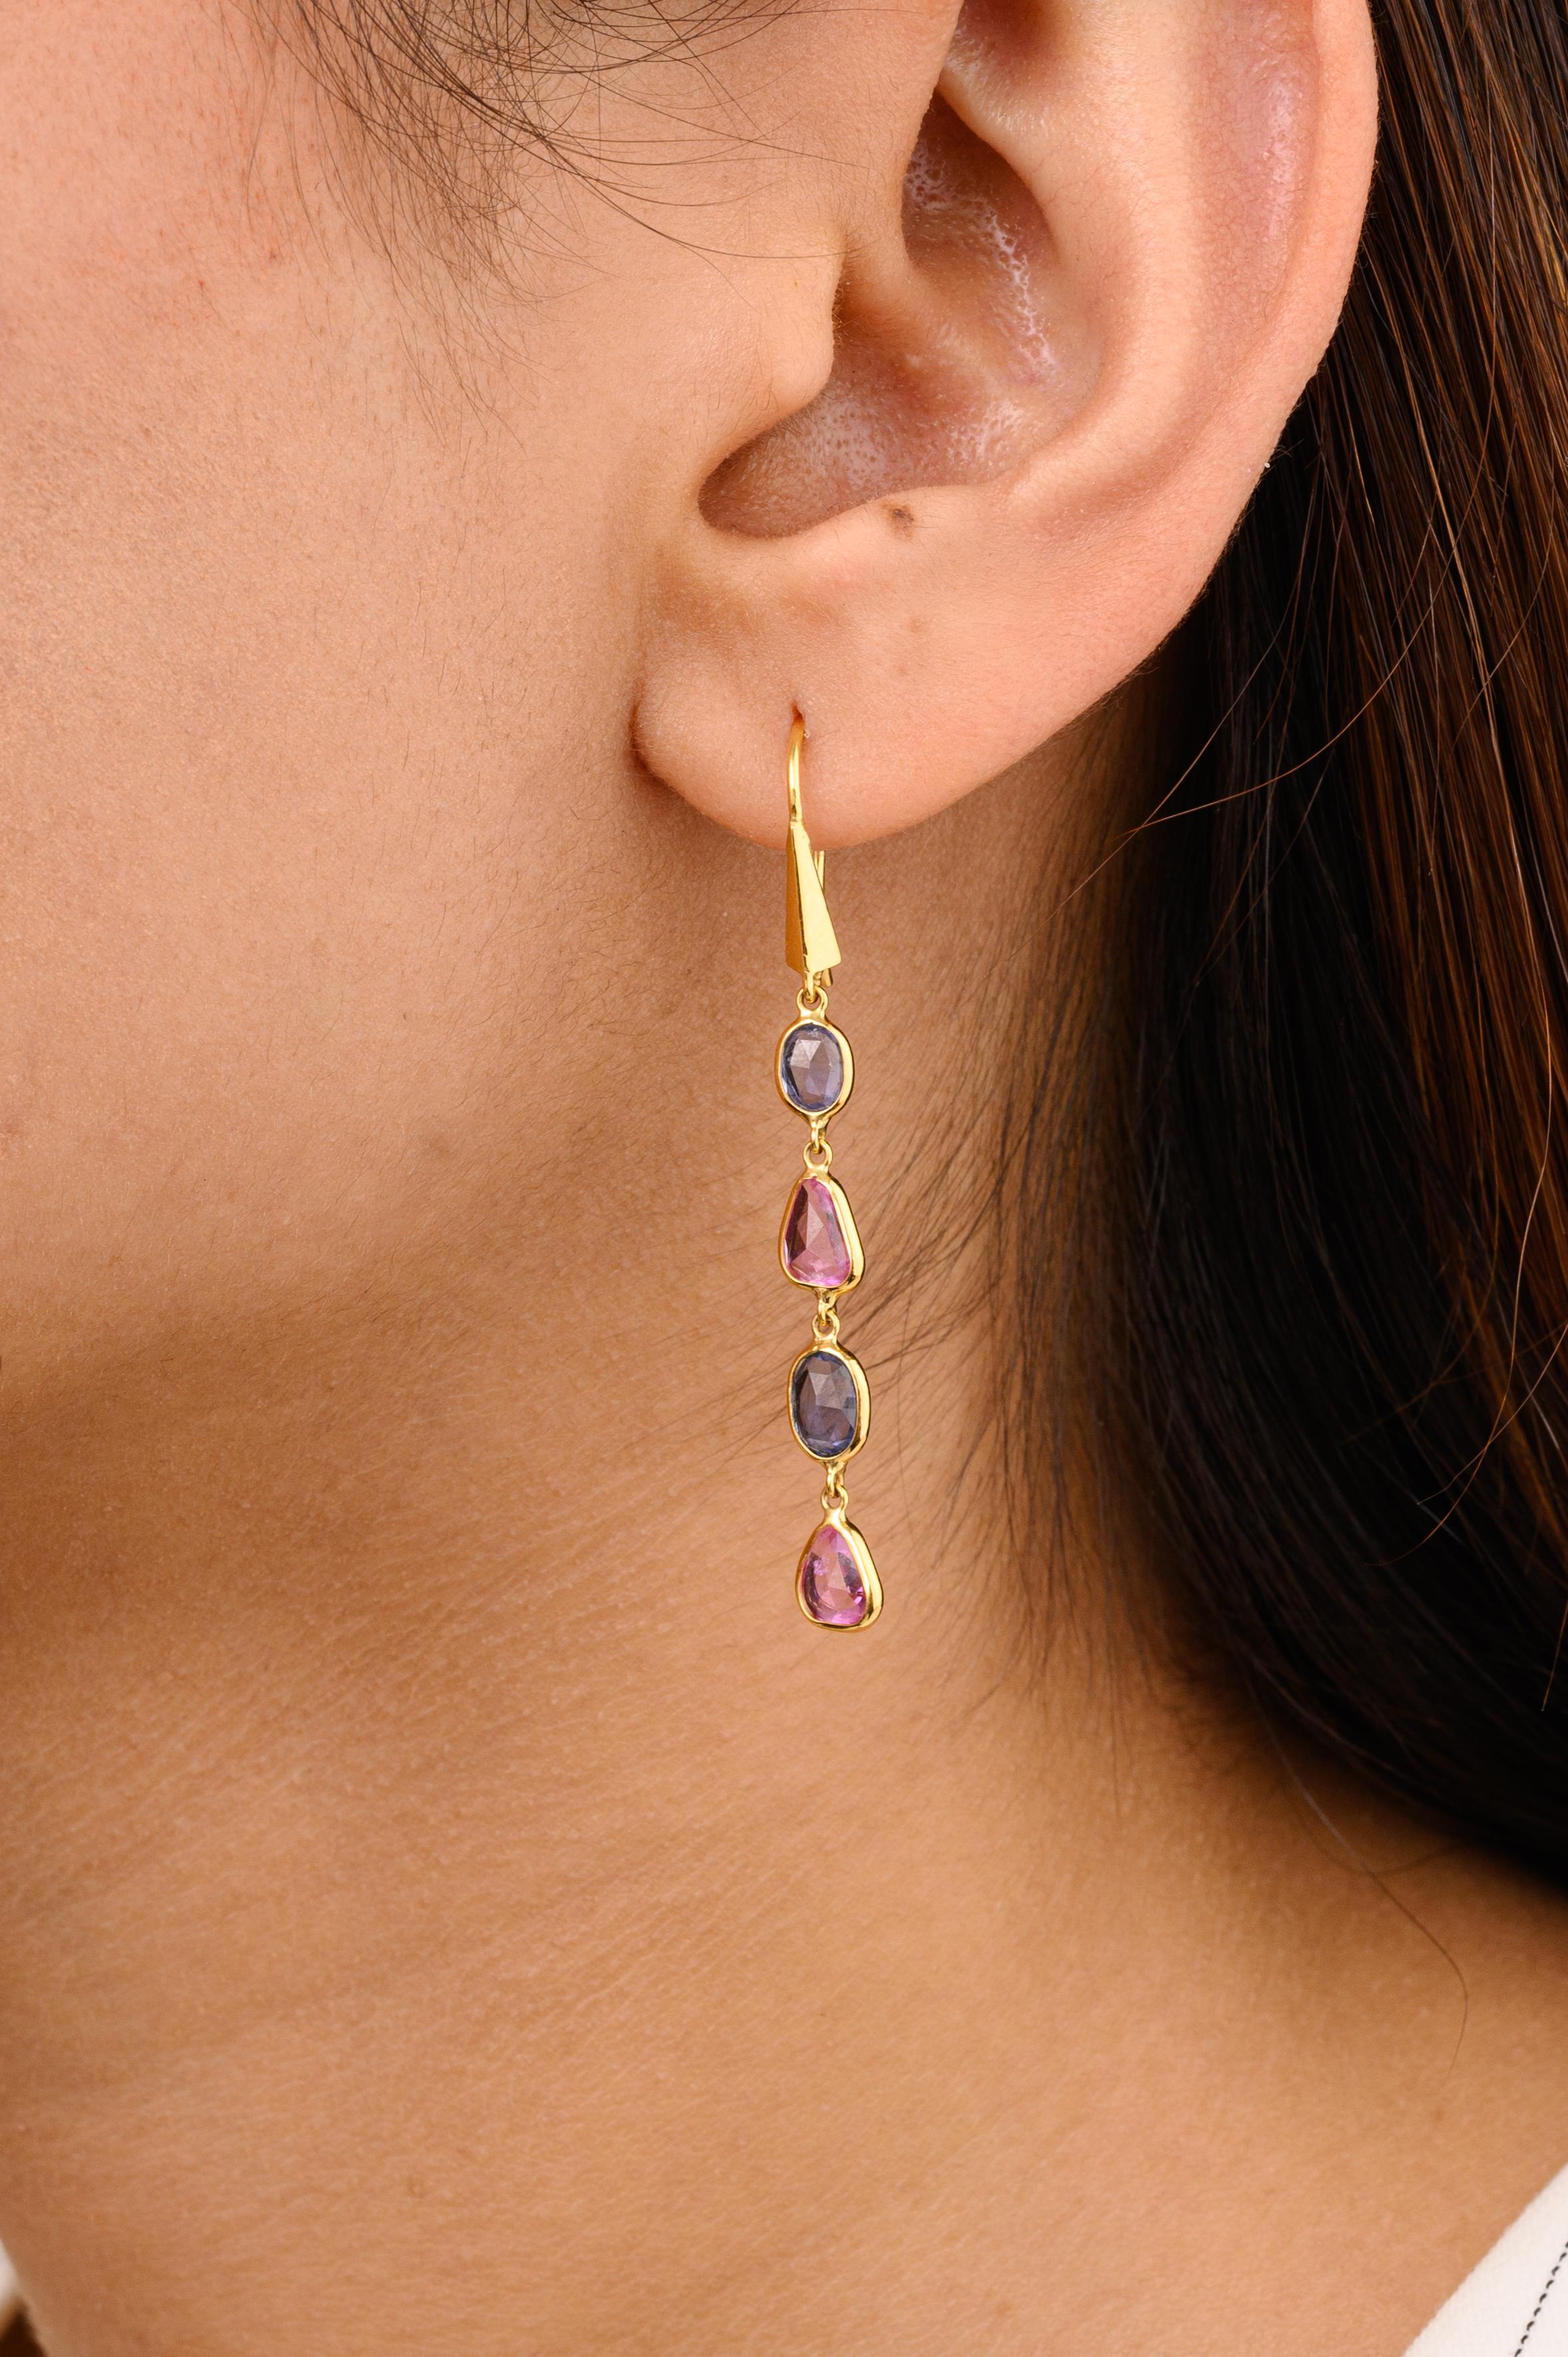 3.66 Carats Multi Sapphire Chain Drop Earrings for Girlfriend in 18K Gold to make a statement with your look. You shall need drop earrings to make a statement with your look. These earrings create a sparkling, luxurious look featuring uneven cut